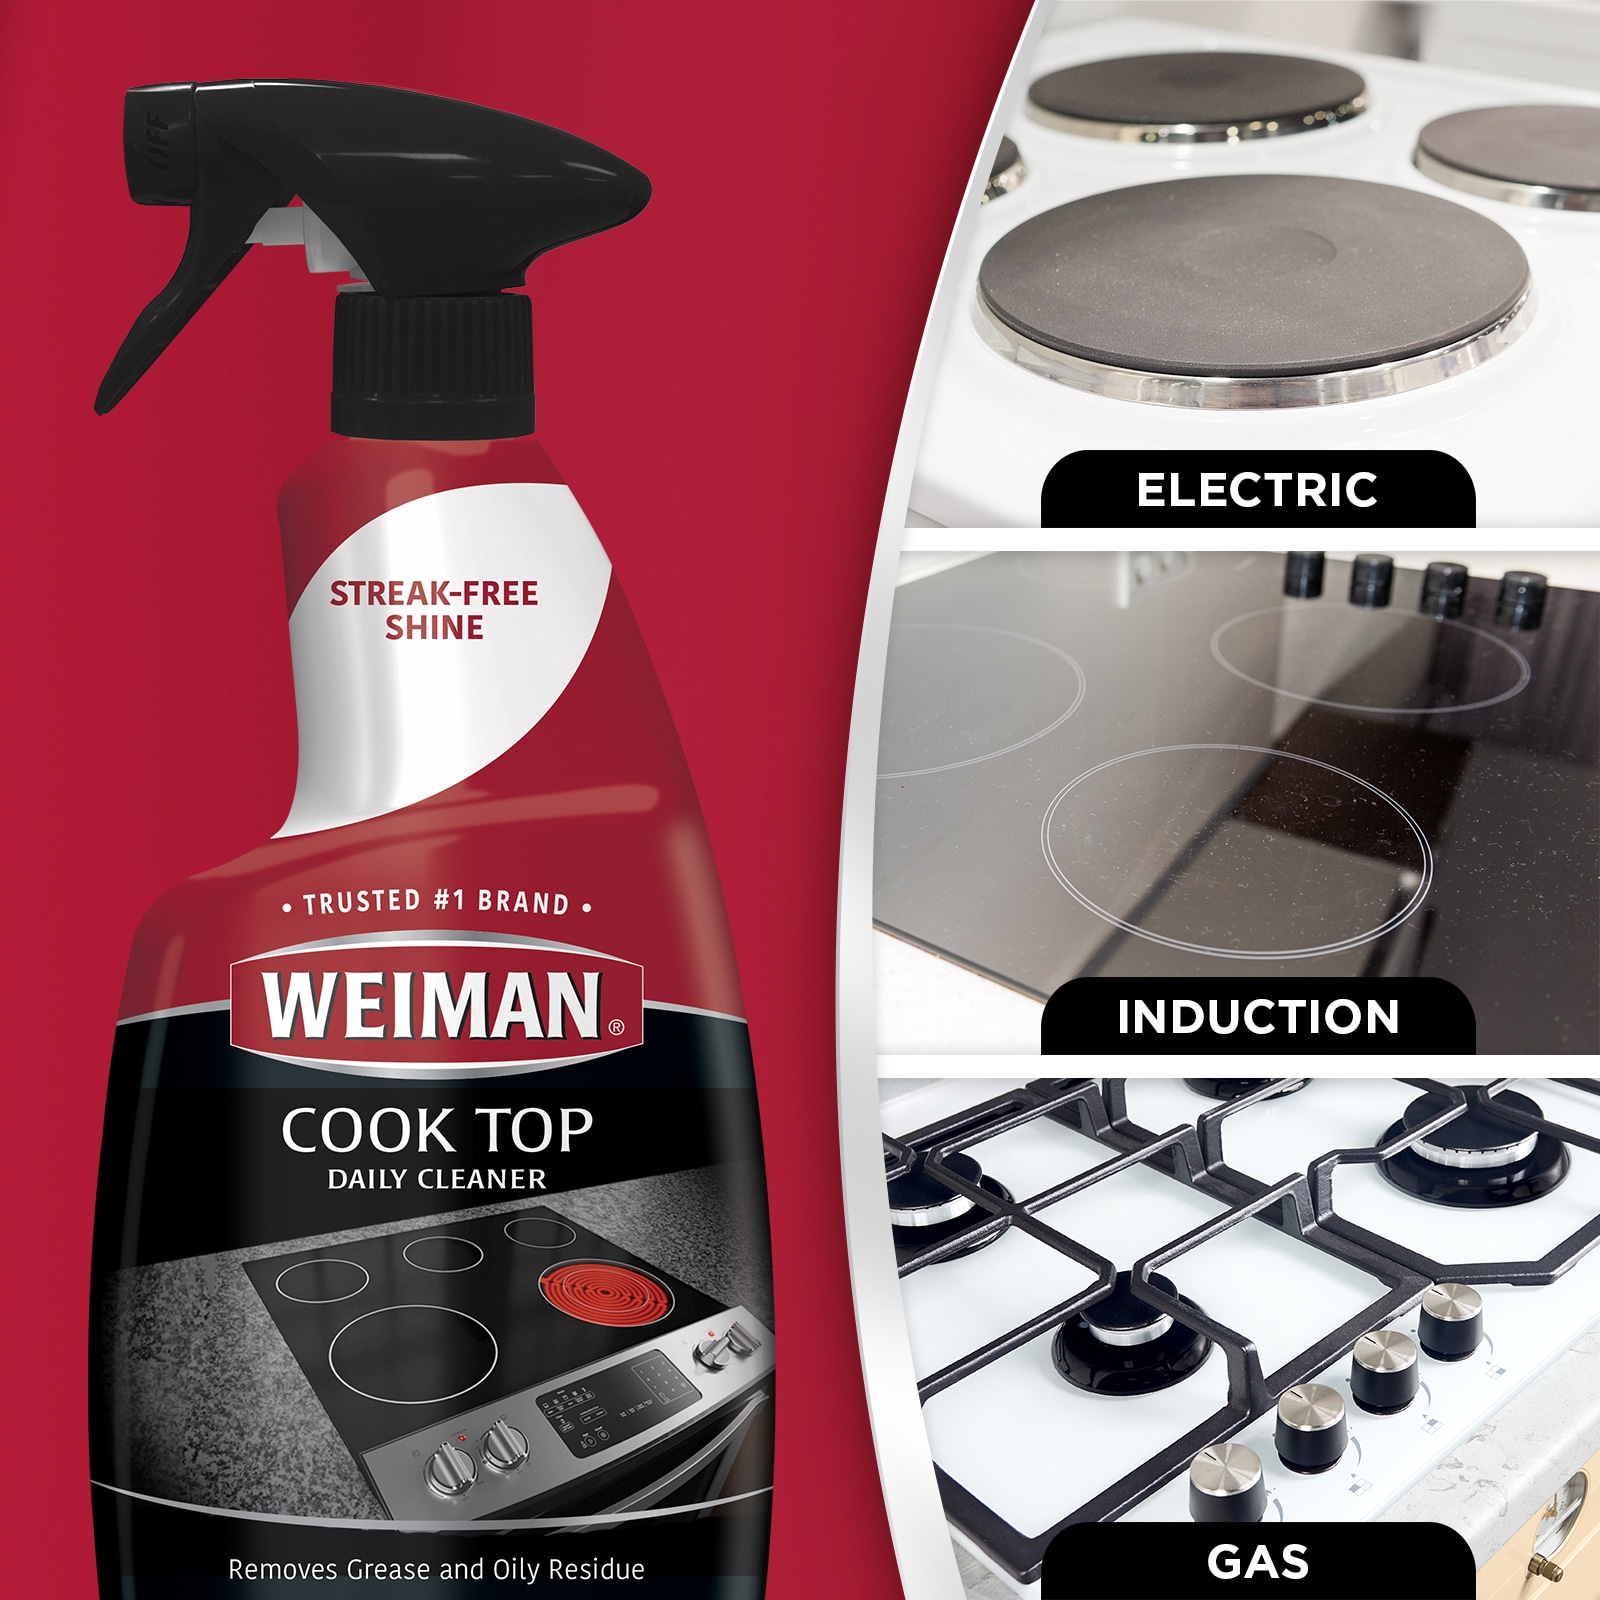 WEIMAN PRODUCTS CLEANER HAND HEAVY DUTY 18OZ